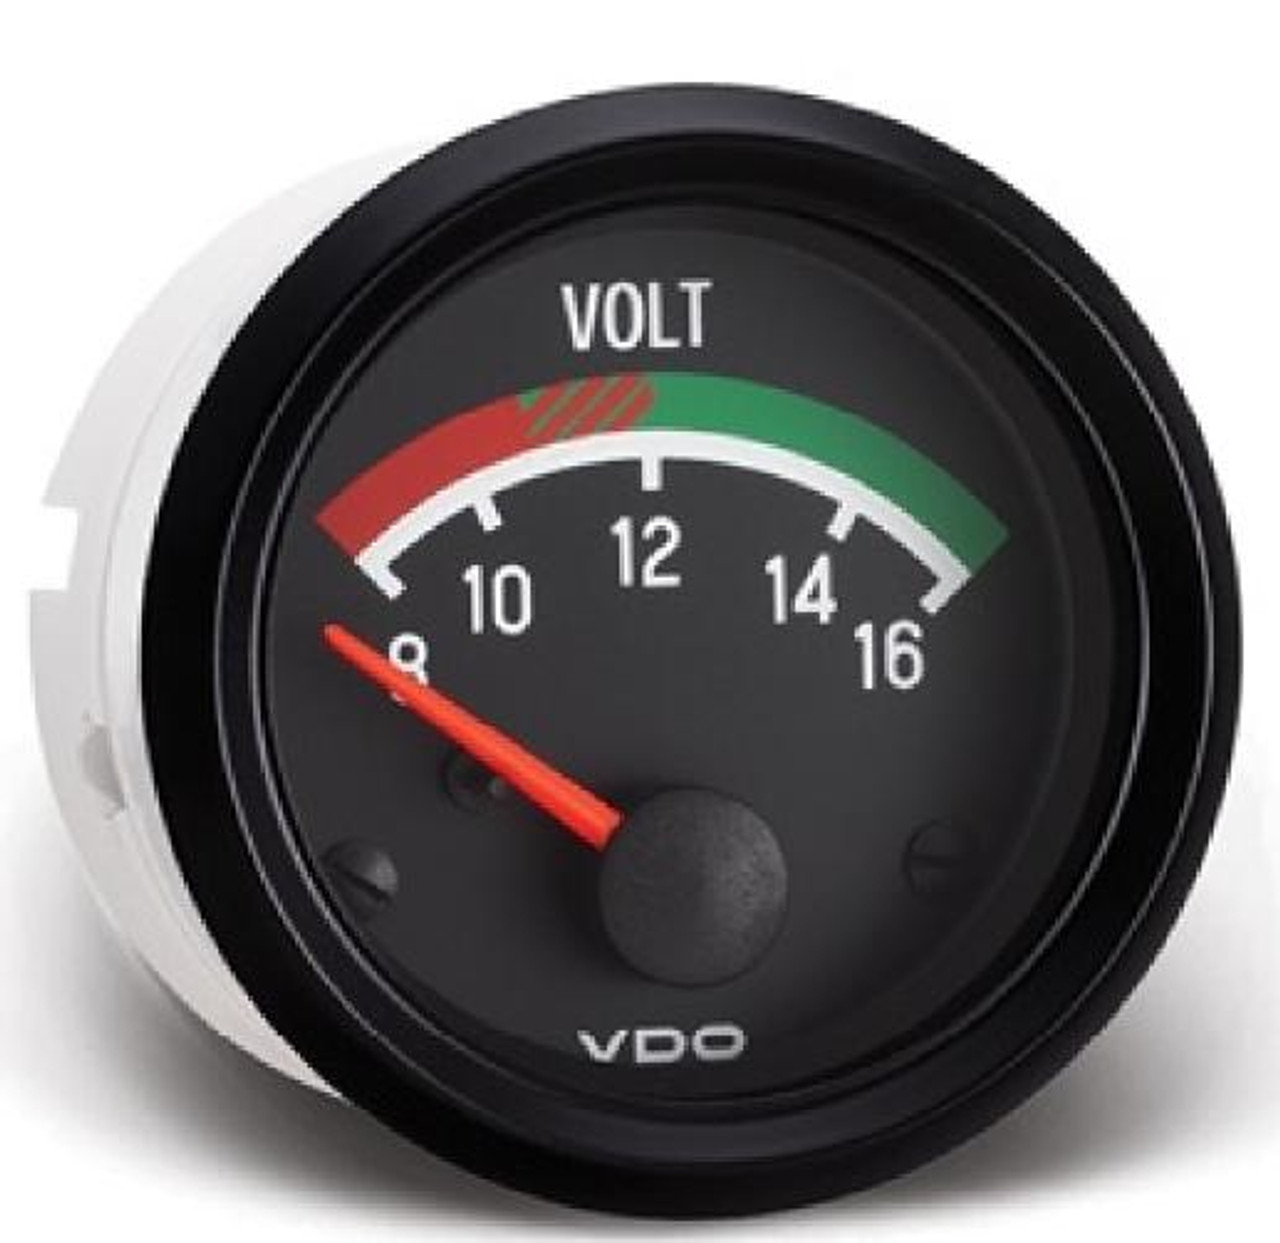 VDO Cockpit Series Part # 332-041 Voltmeter, 8 - 16 Volt, 52mm (2 1/16") Diameter. Halo Lighting w/ Red Pointer, 12 Volt Lighted. .250" Male Spade Connectors or VDO 3-Prong Connector for a Clean Install. For 12 Volt Systems.
List $46.27
Can't Find What You are looking for... Contact our Technical Support Staff!